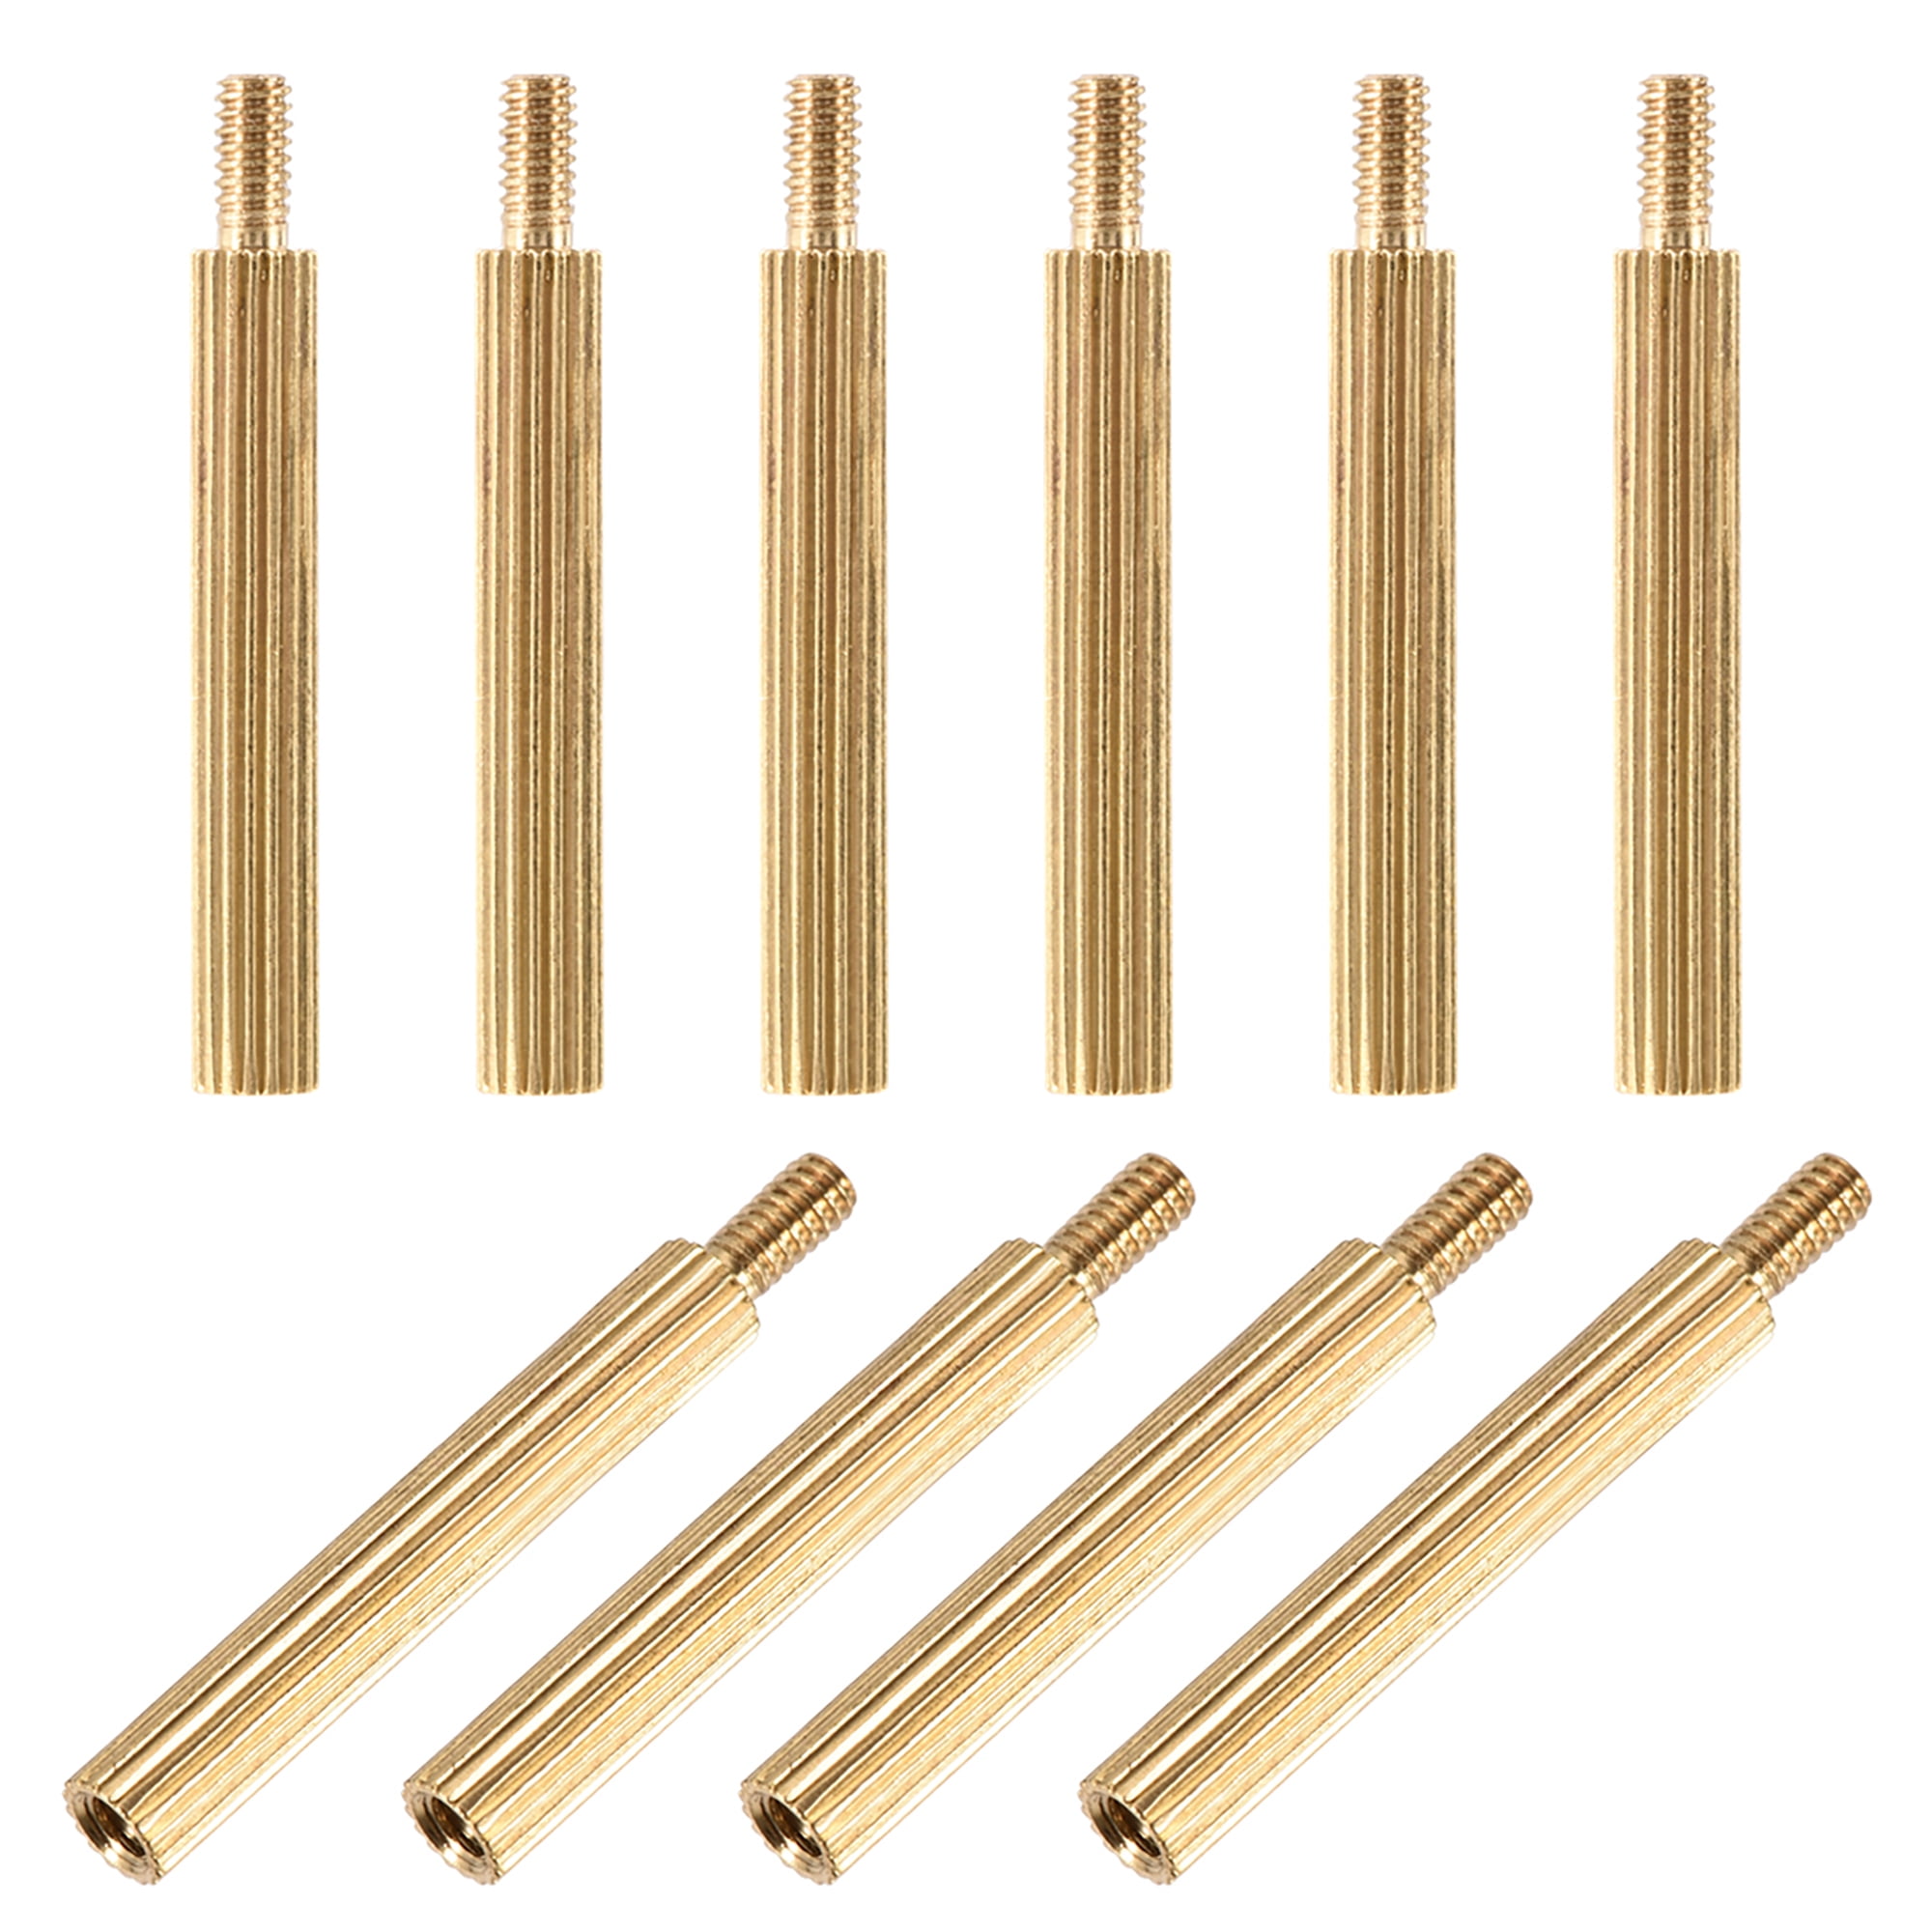 M2*3+3-M2*25+3 Knurled Spacer Stand-Off Male-Female Brass Threaded Spacer 